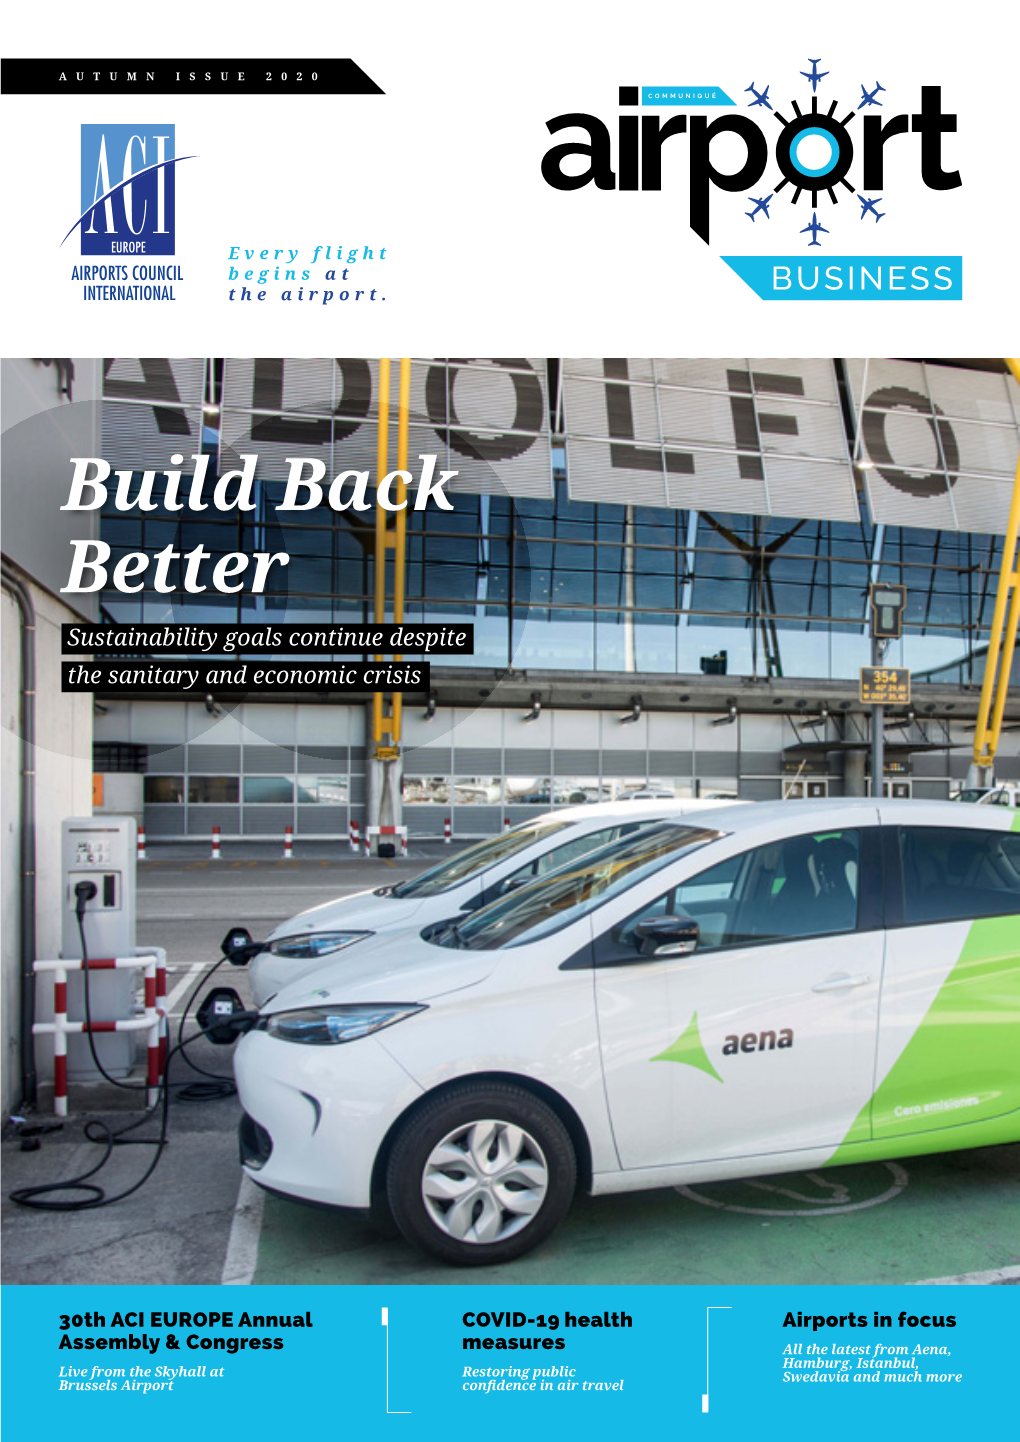 Build Back Better Sustainability Goals Continue Despite the Sanitary and Economic Crisis